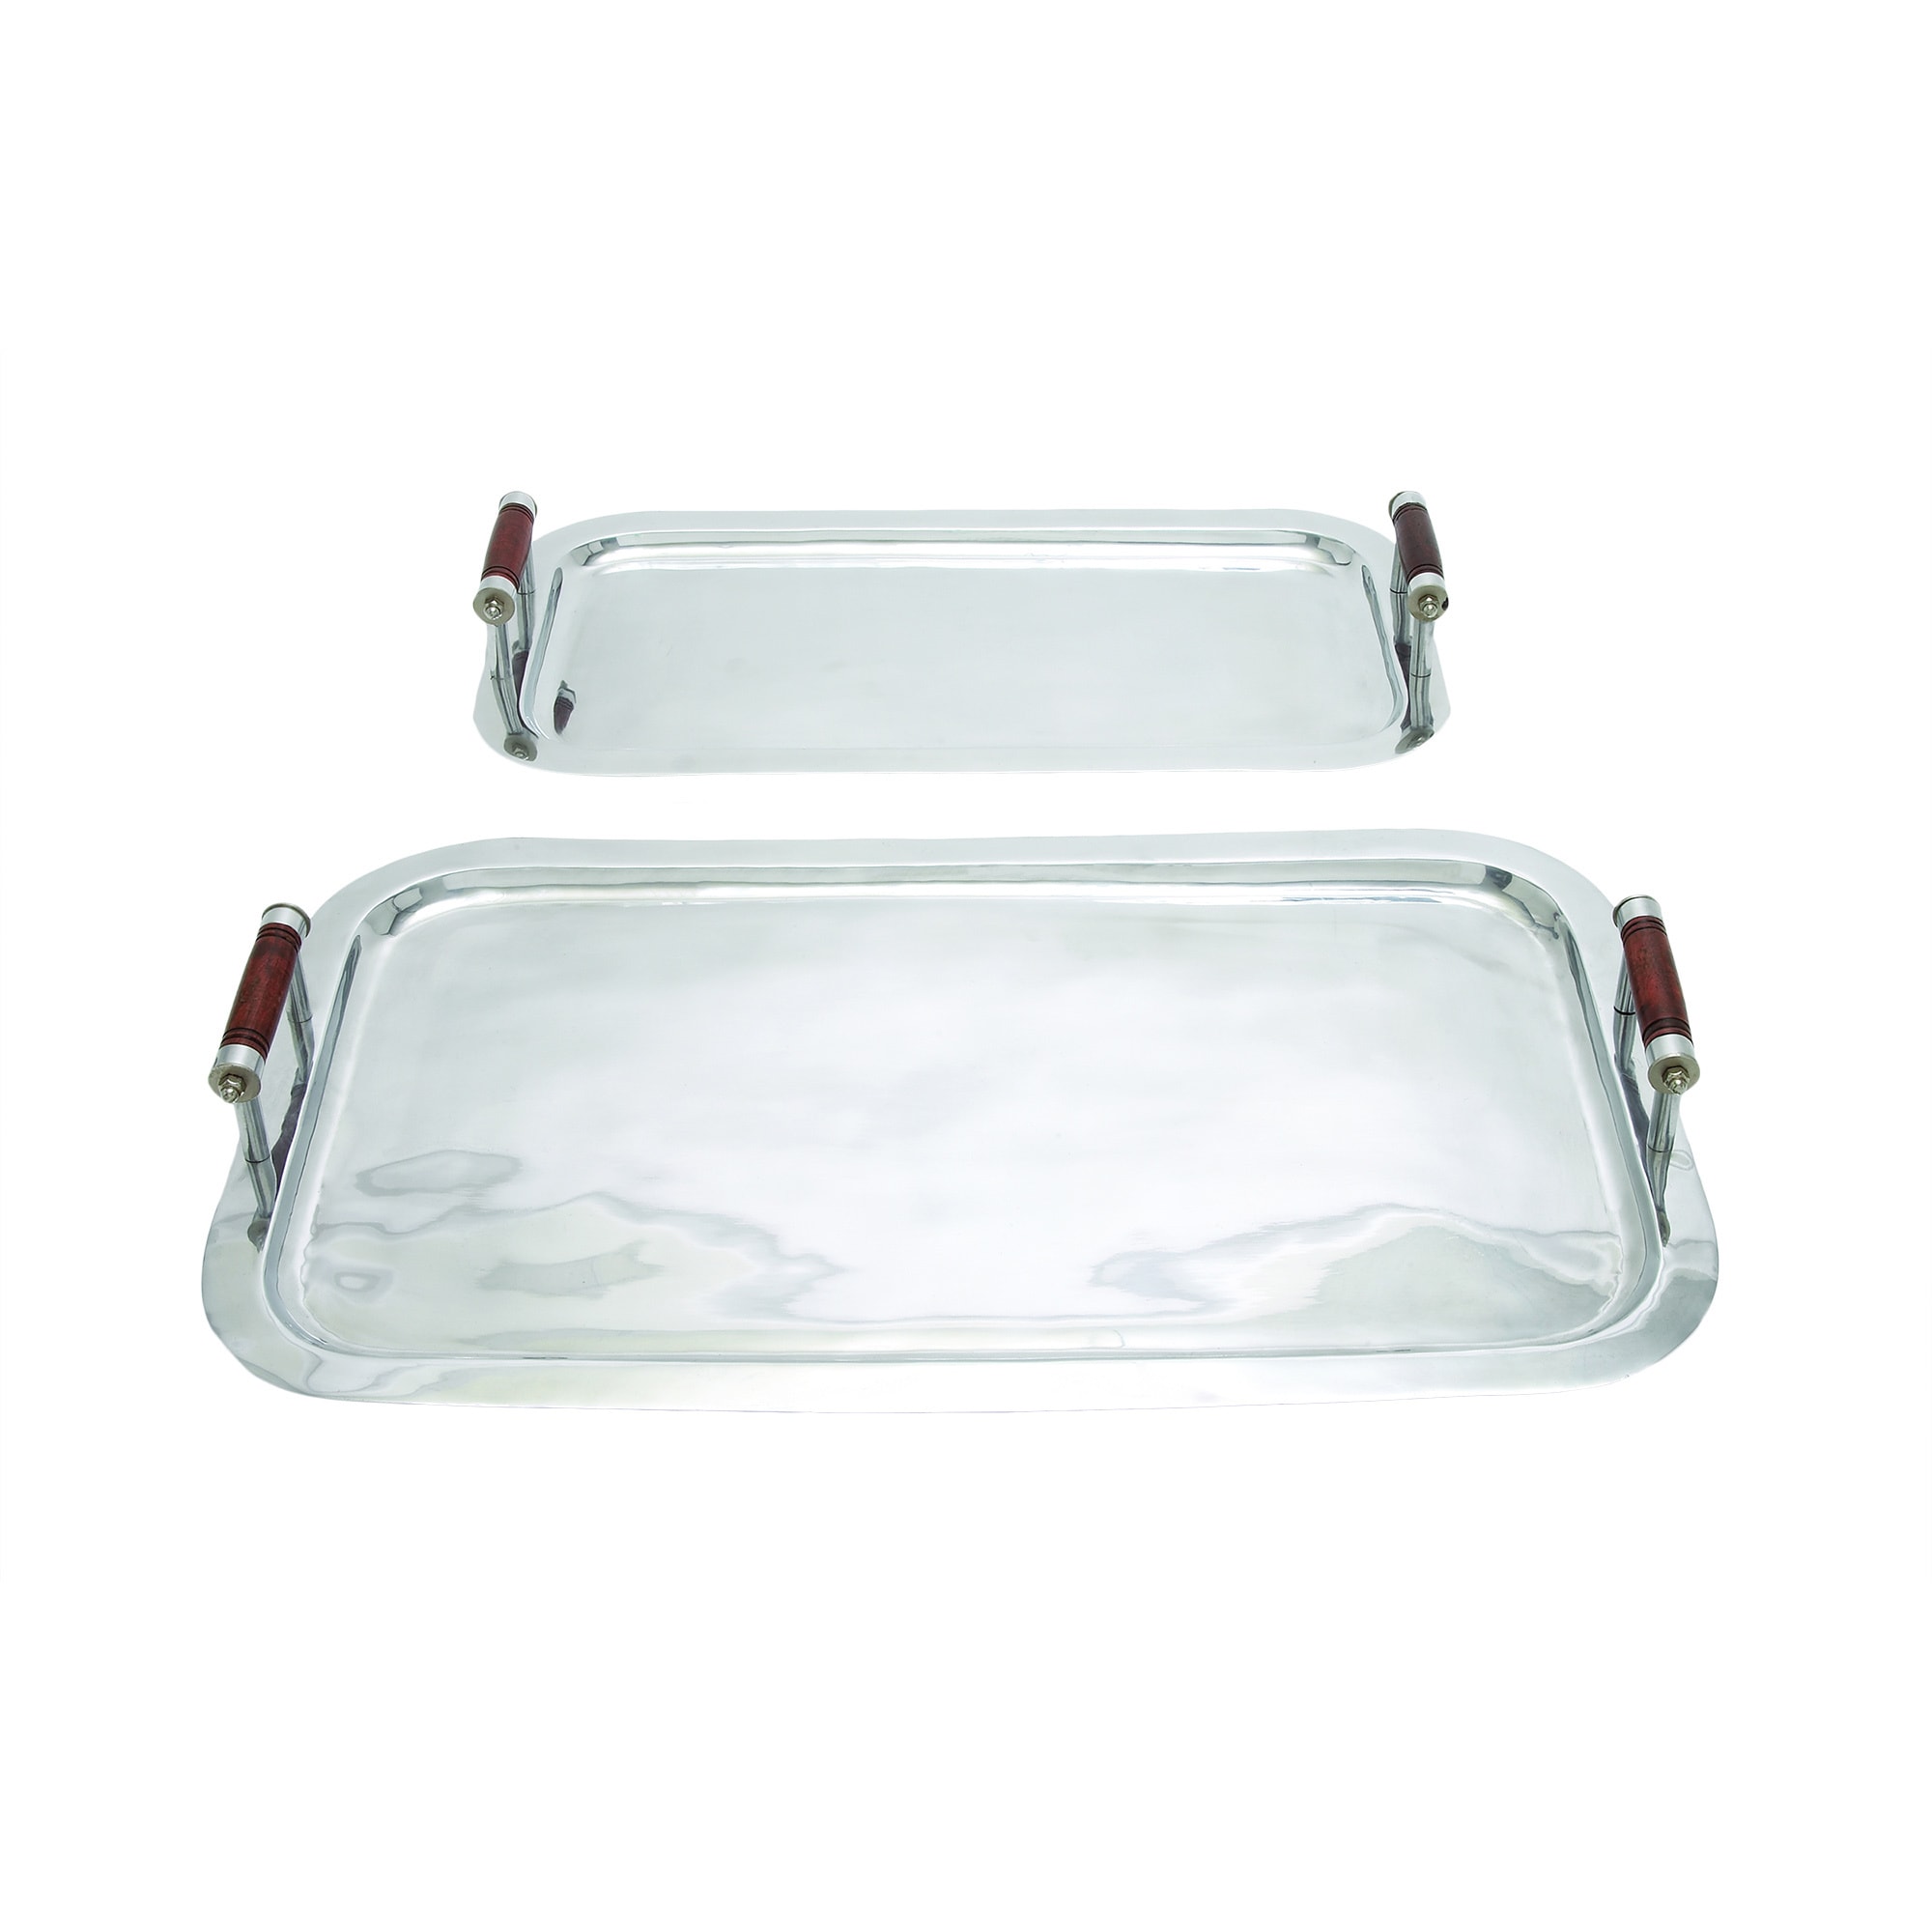 Metal Tray With Wooden Handles (set Of 2)